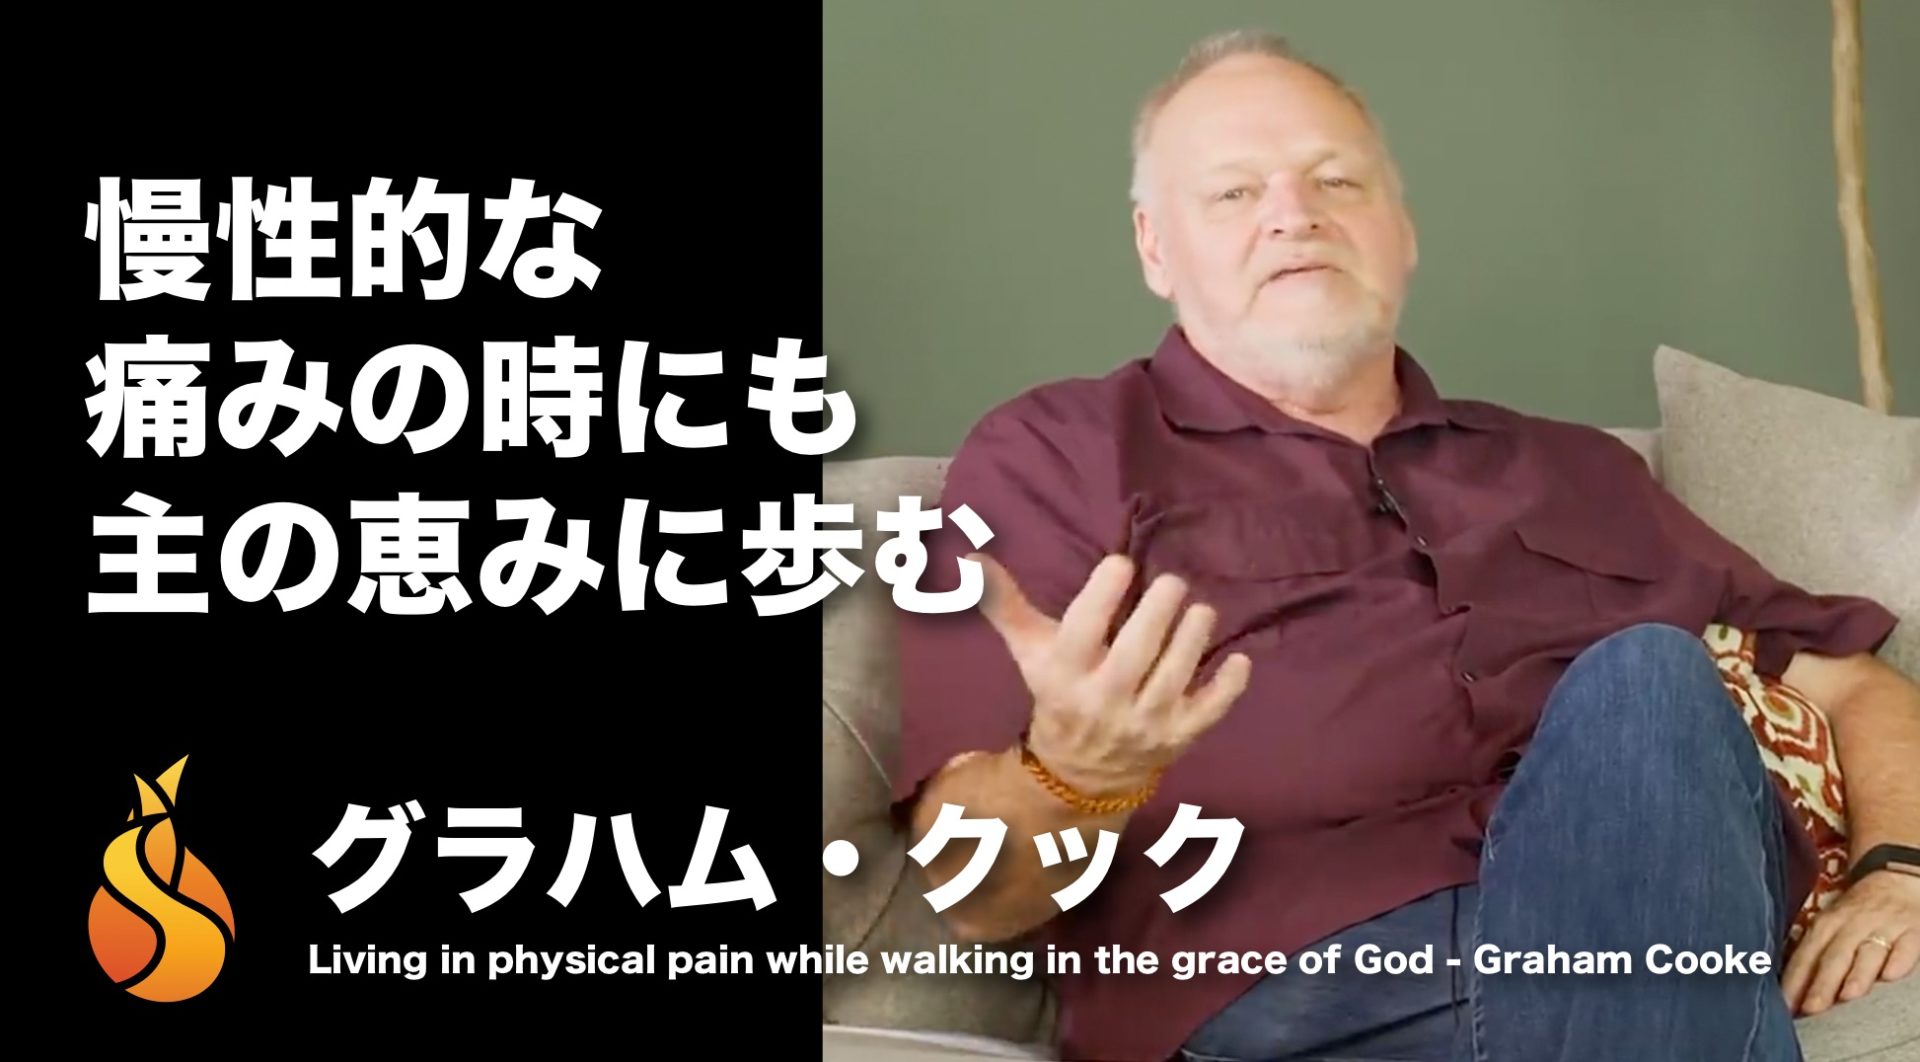 Q&A with Graham Cooke: Living in Physical Pain while Walking in the Grace of God.